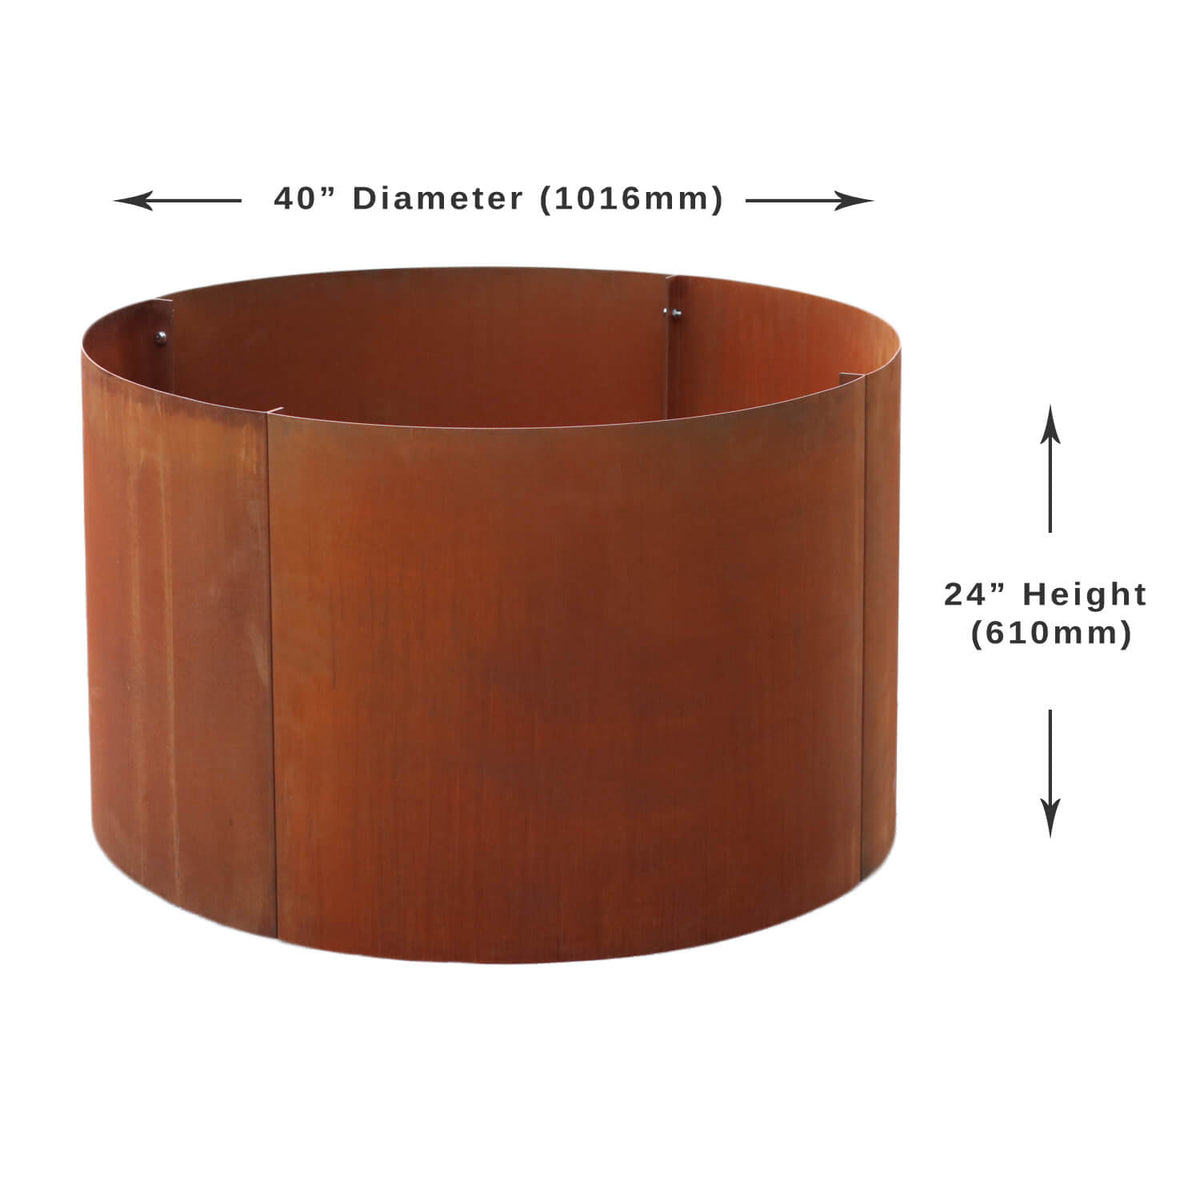 dimensions of large corten steel round raised bed